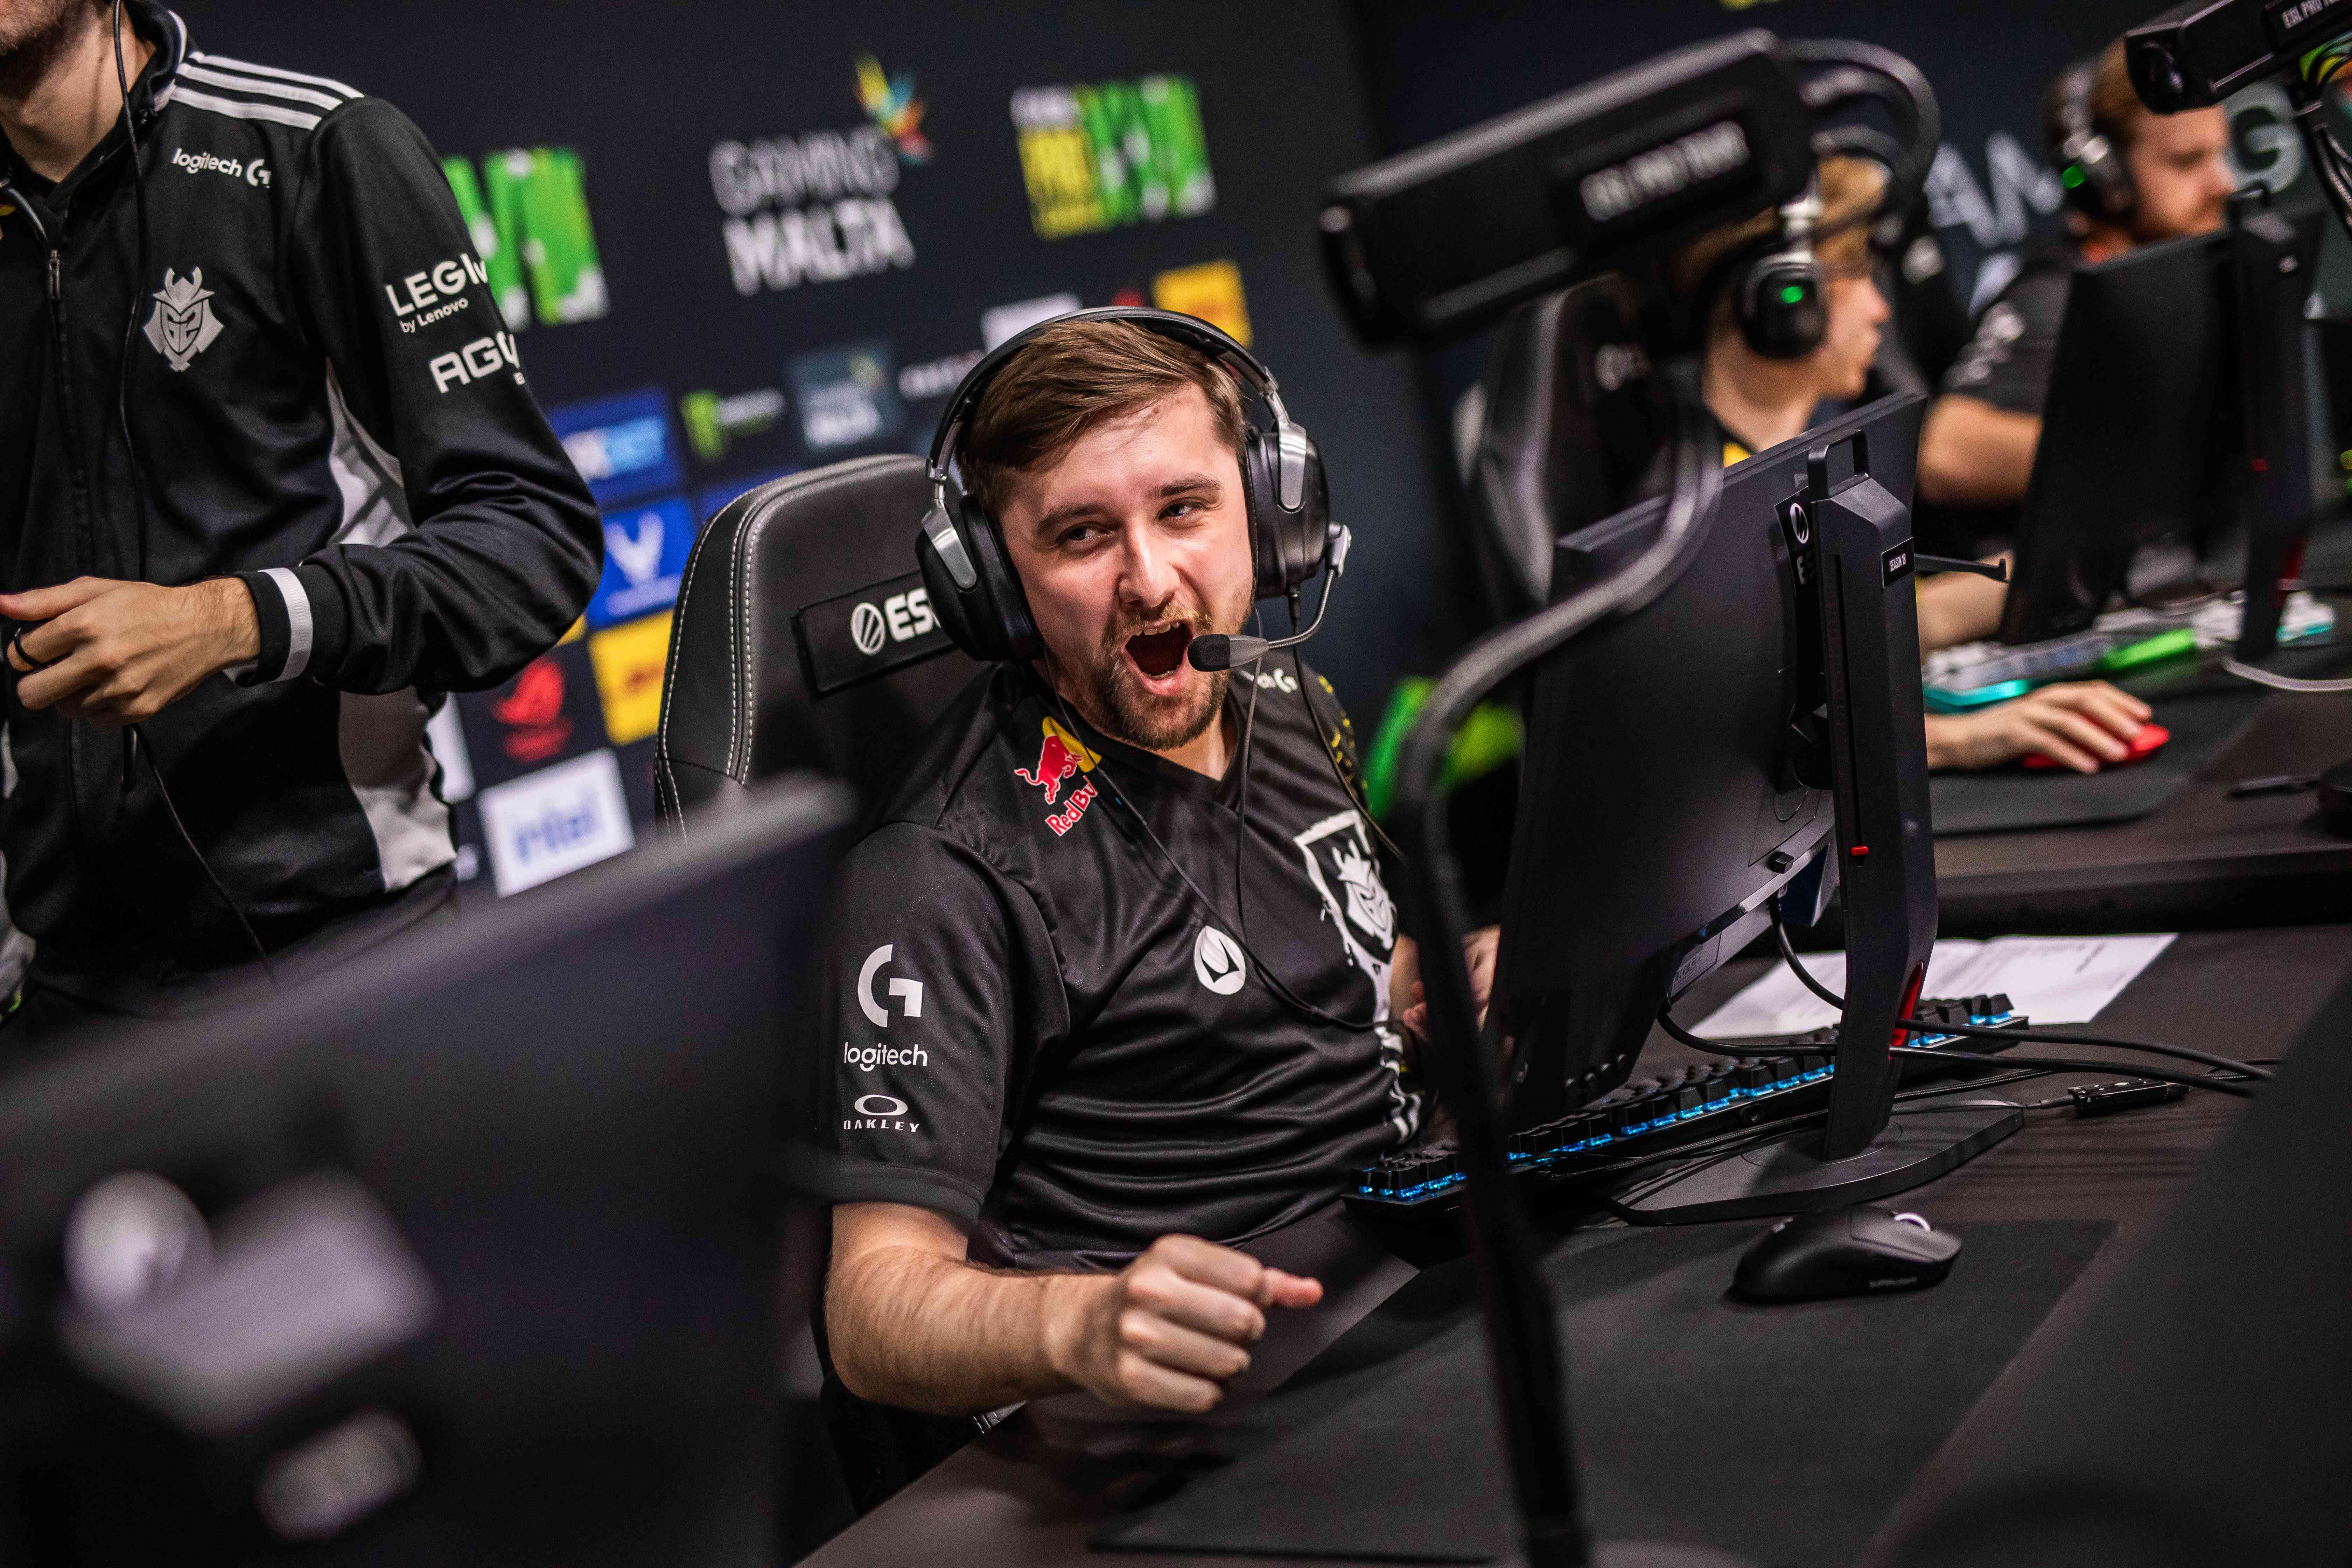 G2’s inconsistency is not exactly news, but the expectations are much higher after the team’s title at IEM Cologne (Image Credits: ESL | Adam Lakomy)